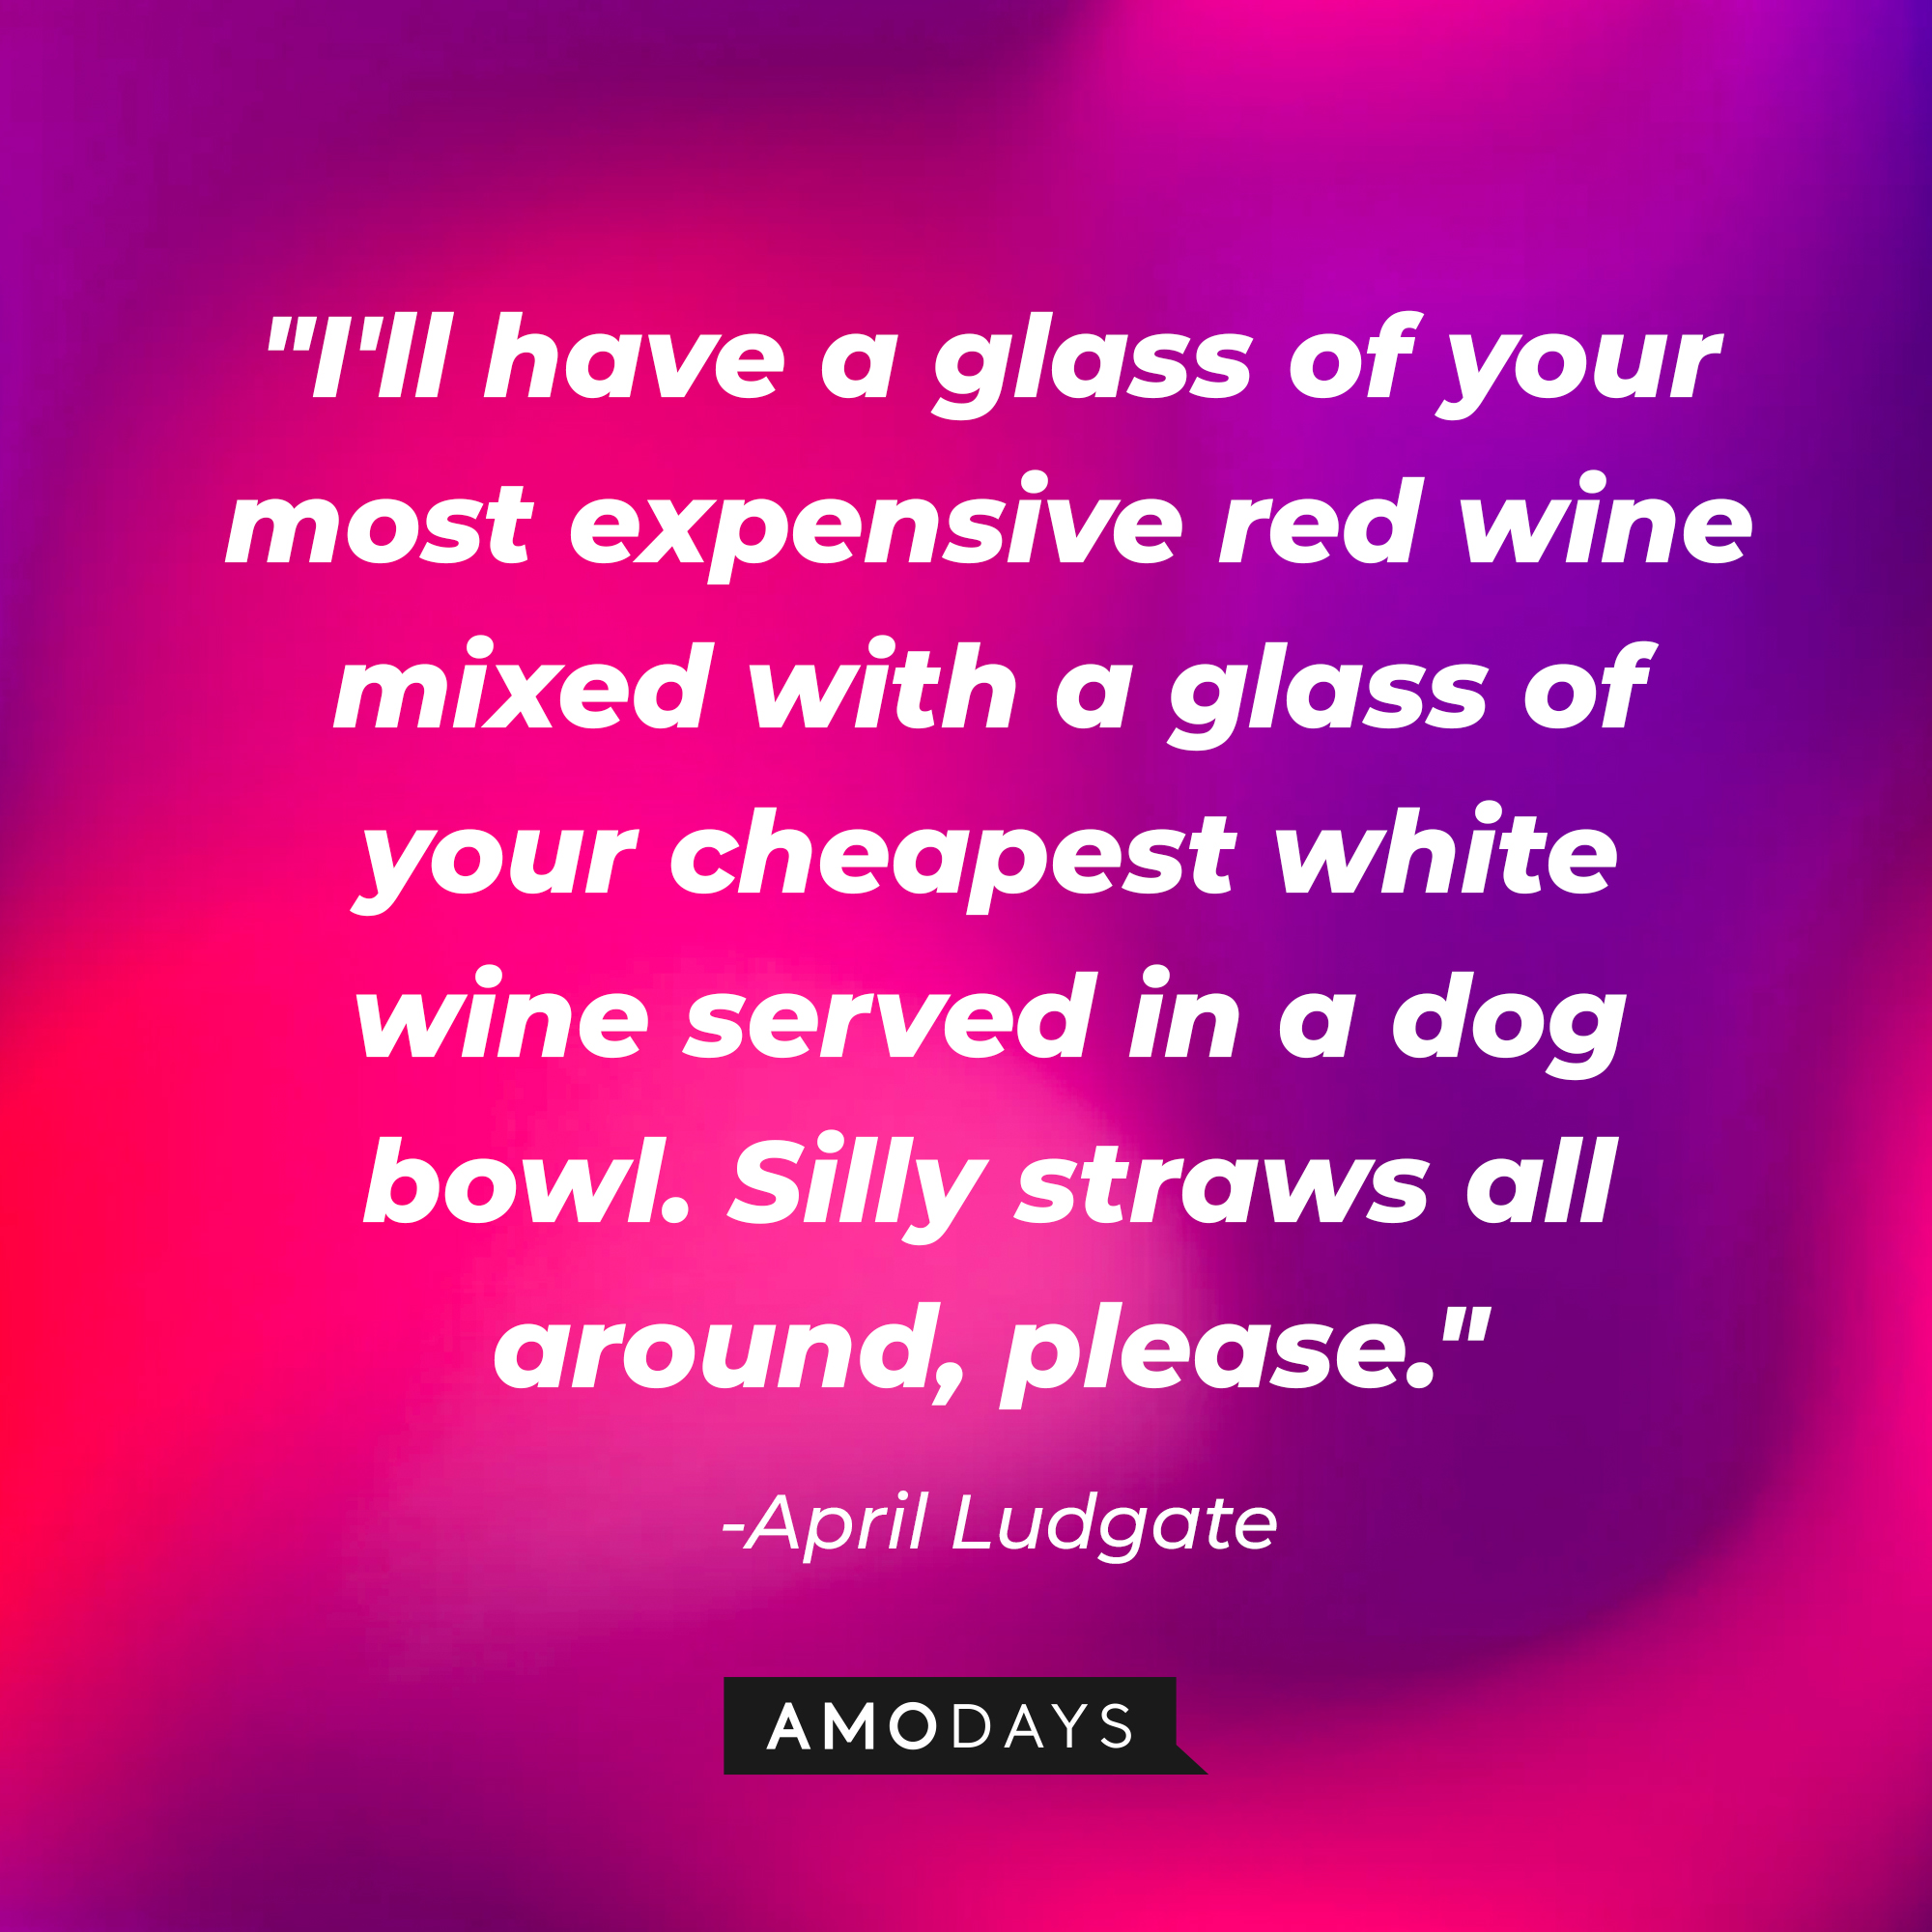 April Ludgate's quote, "I'll have a glass of your most expensive red wine mixed with a glass of your cheapest white wine served in a dog bowl. Silly straws all around, please." | Source: AmoDays